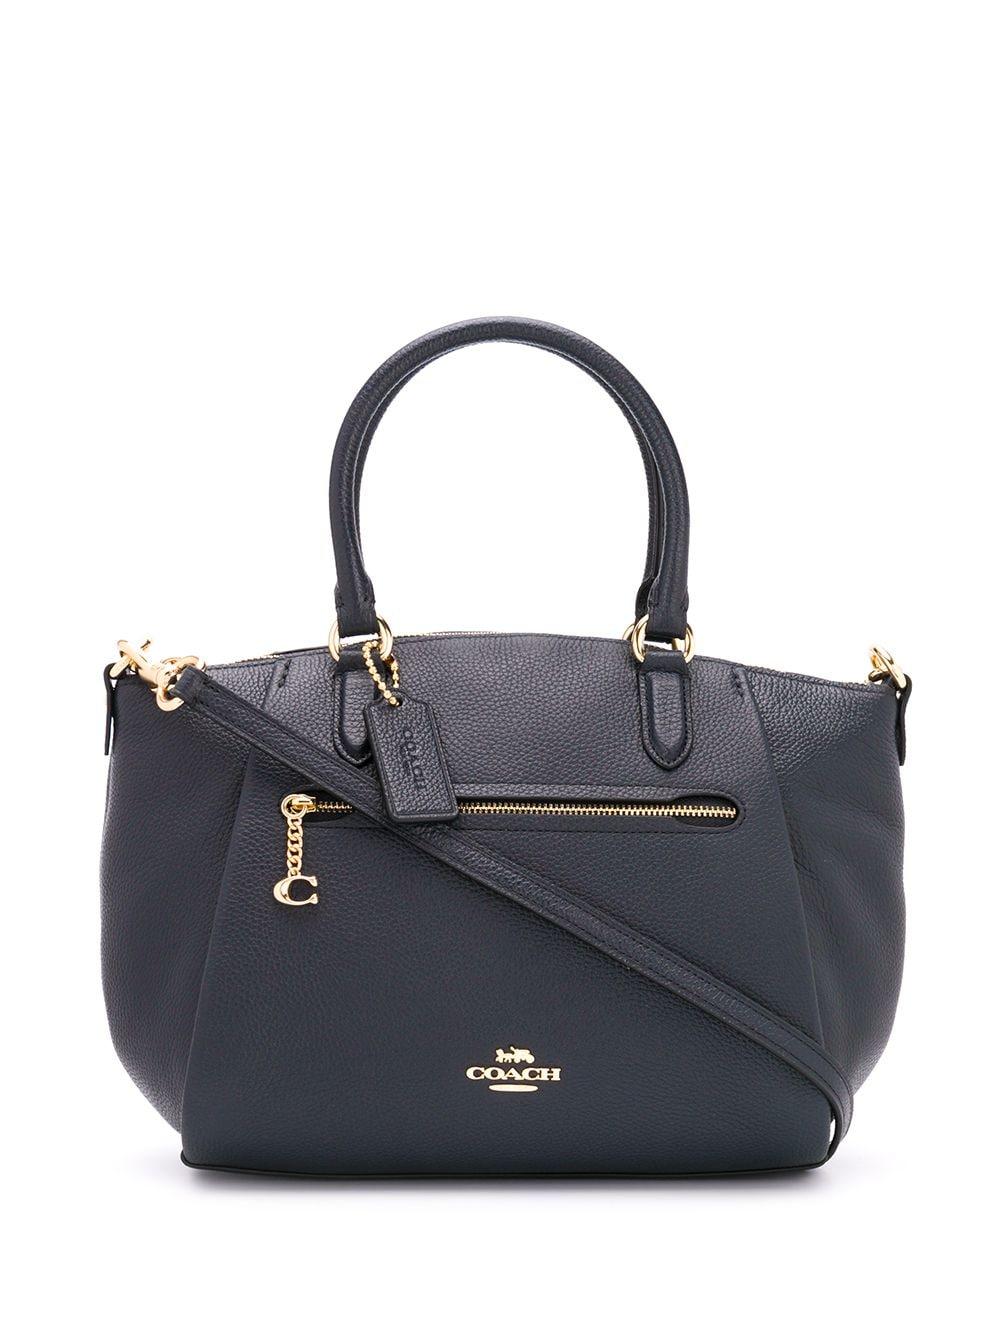 COACH Leather Elise Logo Tote Bag in Blue - Lyst